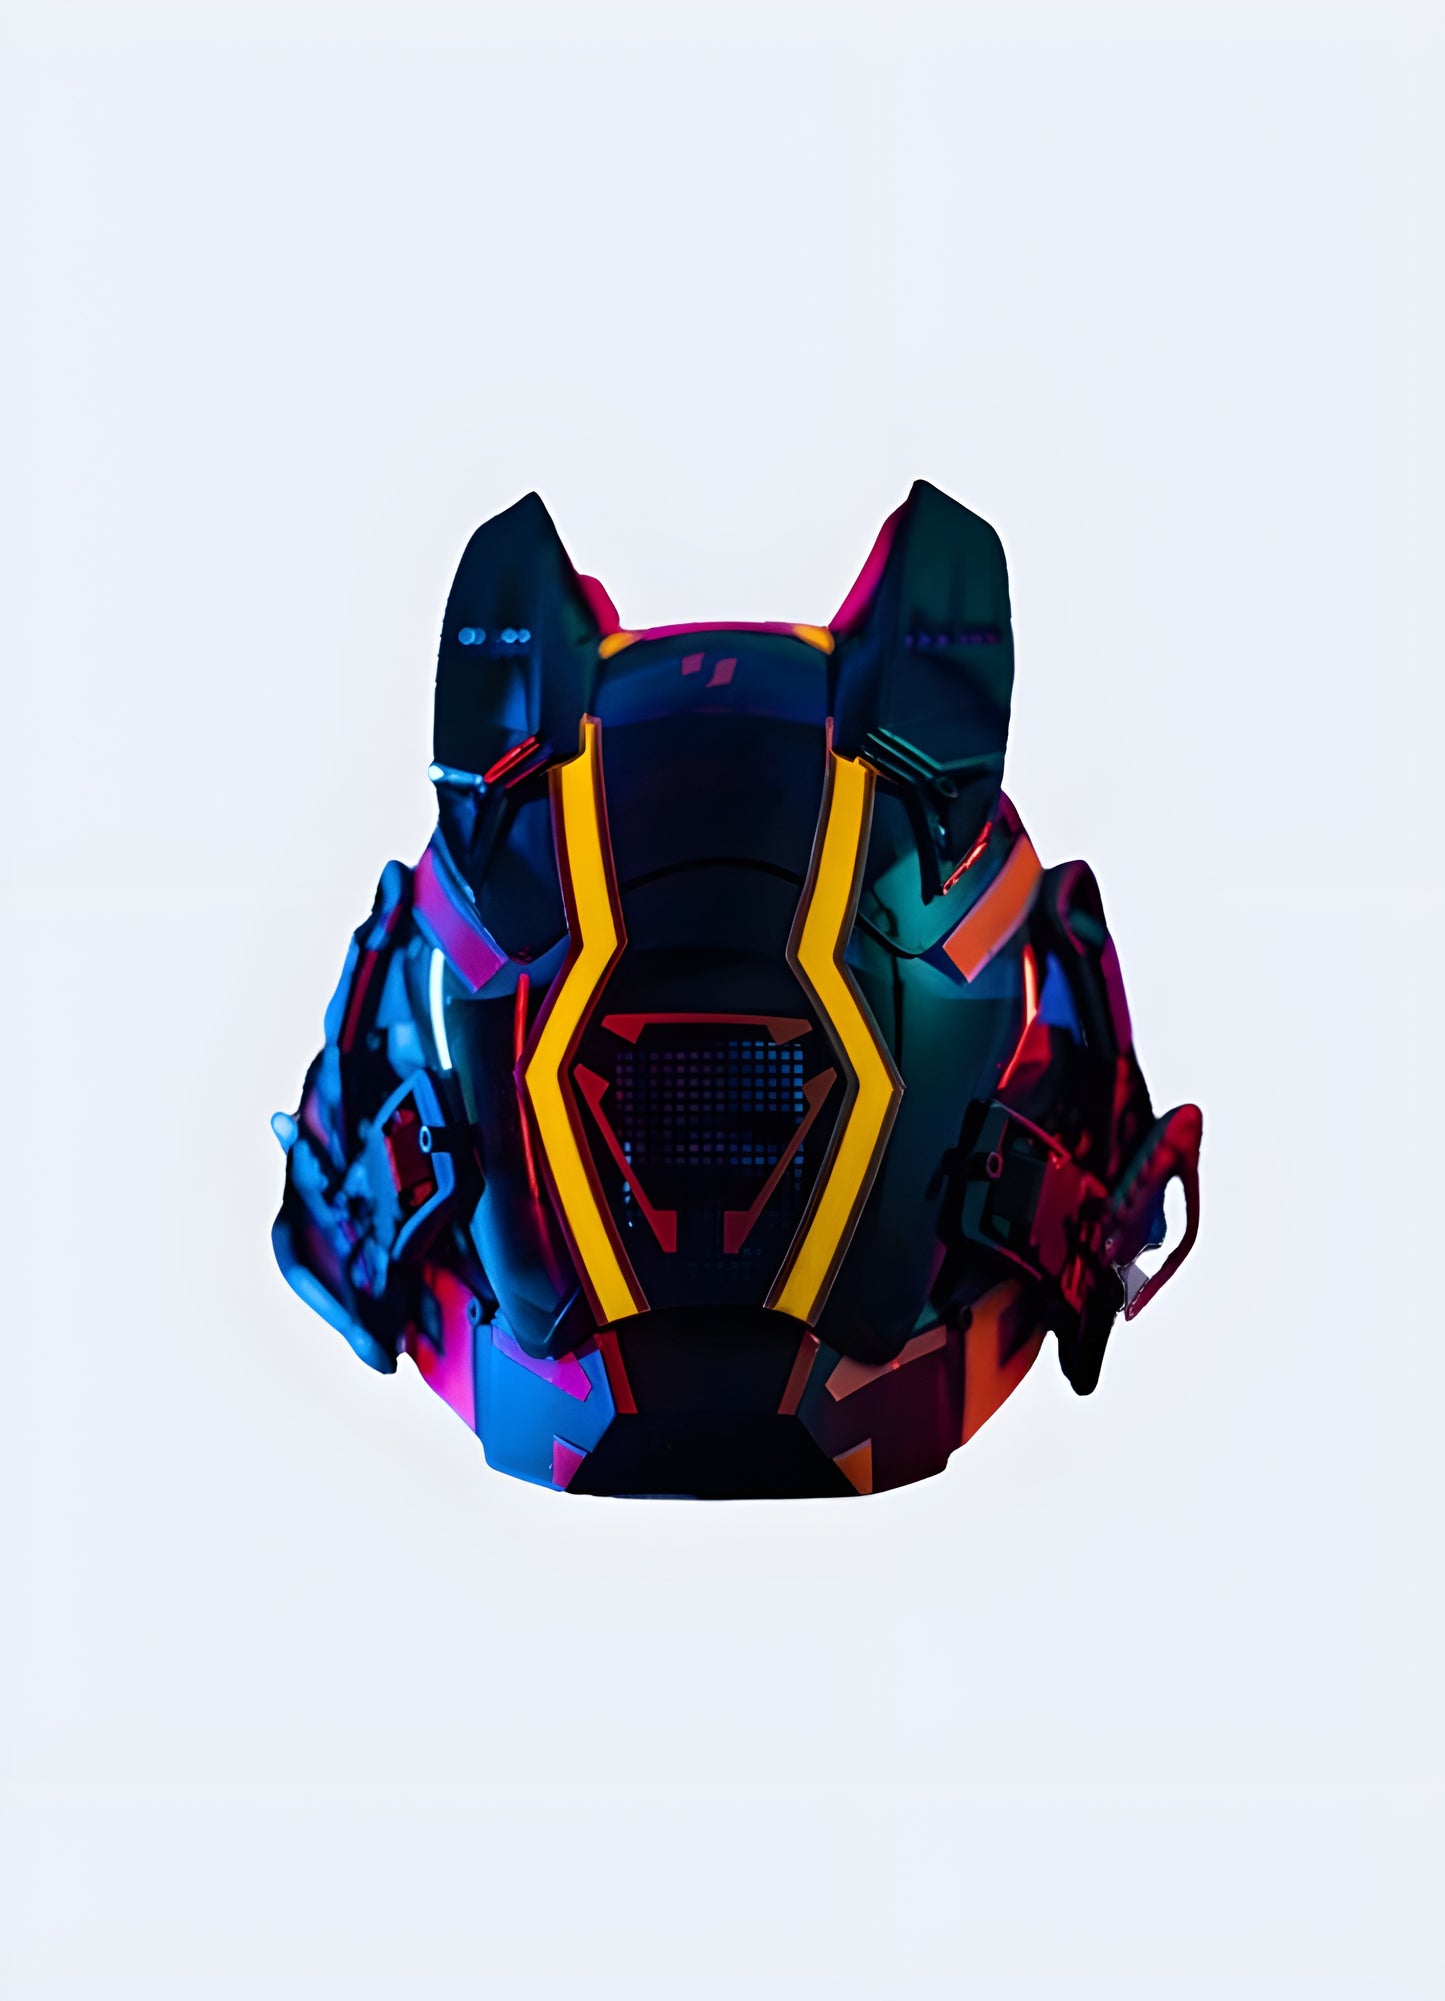 With its unique design, the cyberpunk legendary helmet is sure to turn heads.